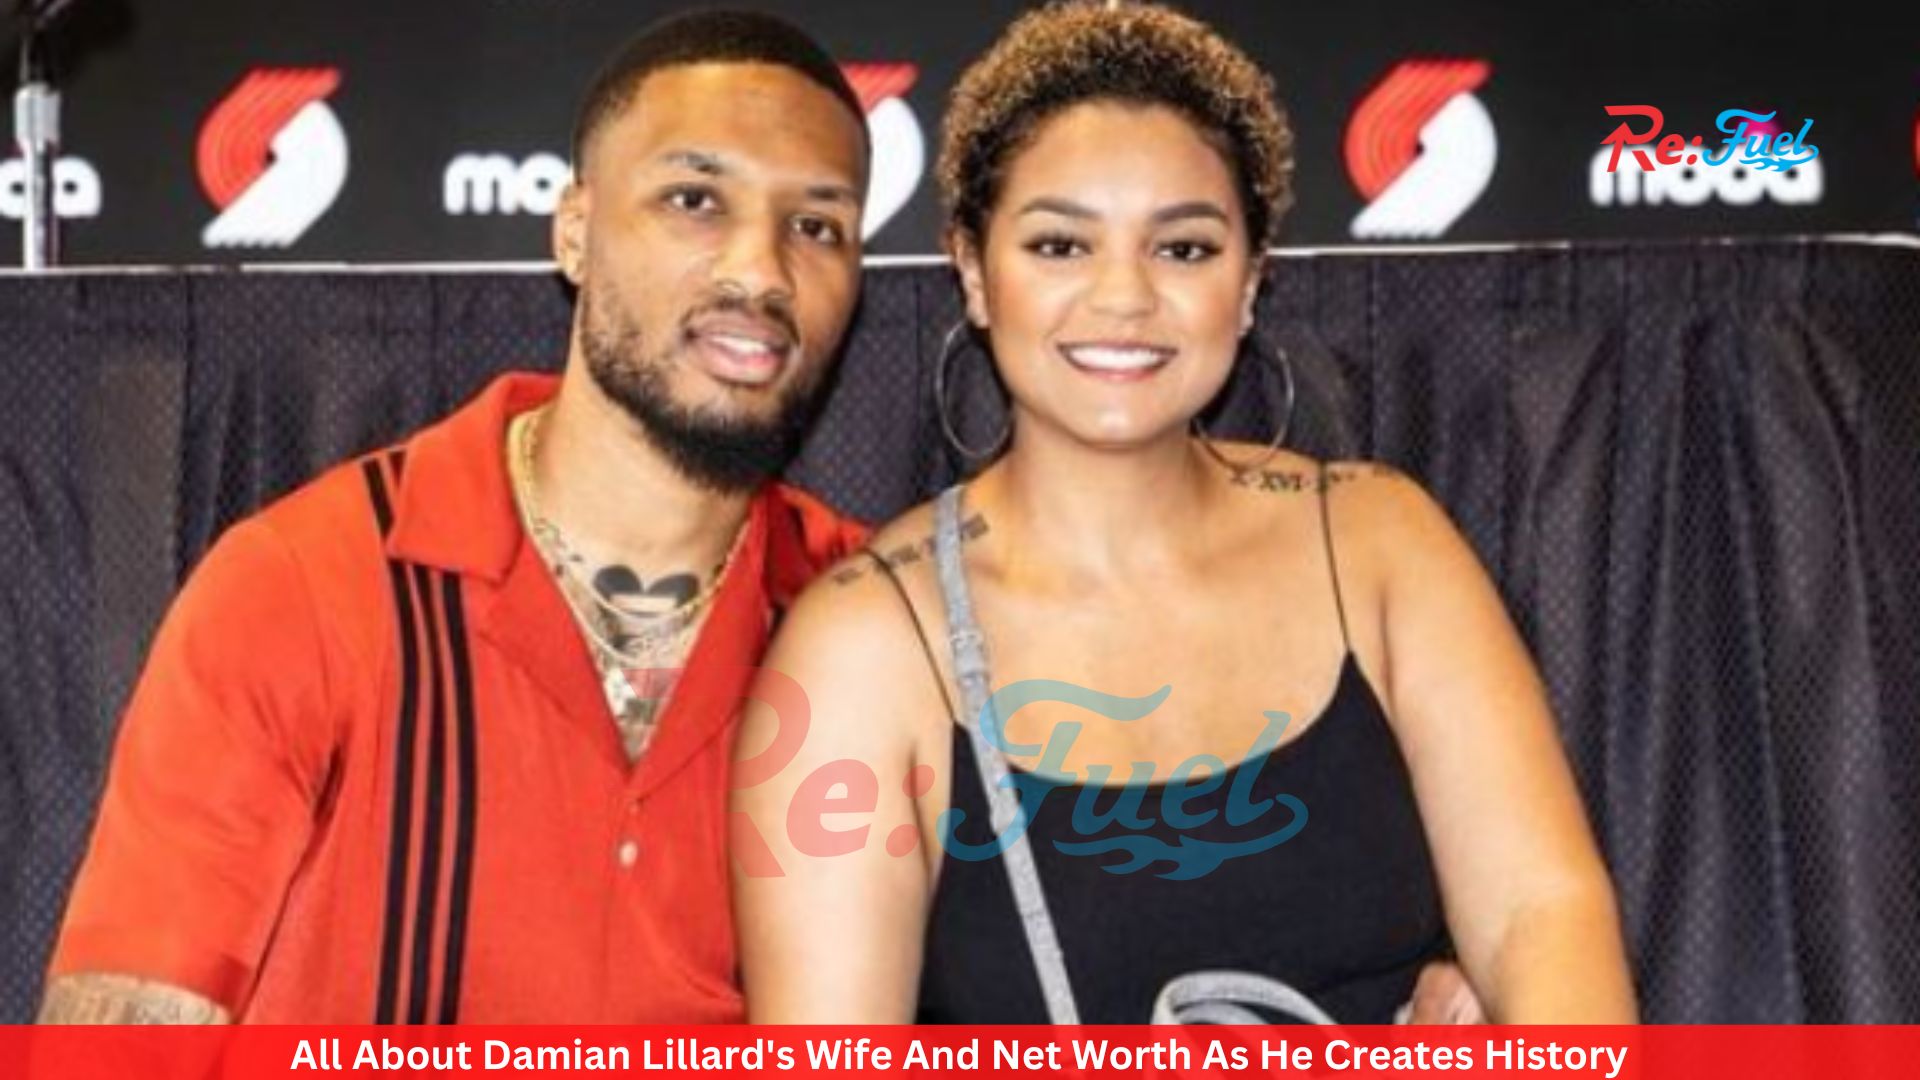 All About Damian Lillard's Wife And Net Worth As He Creates History